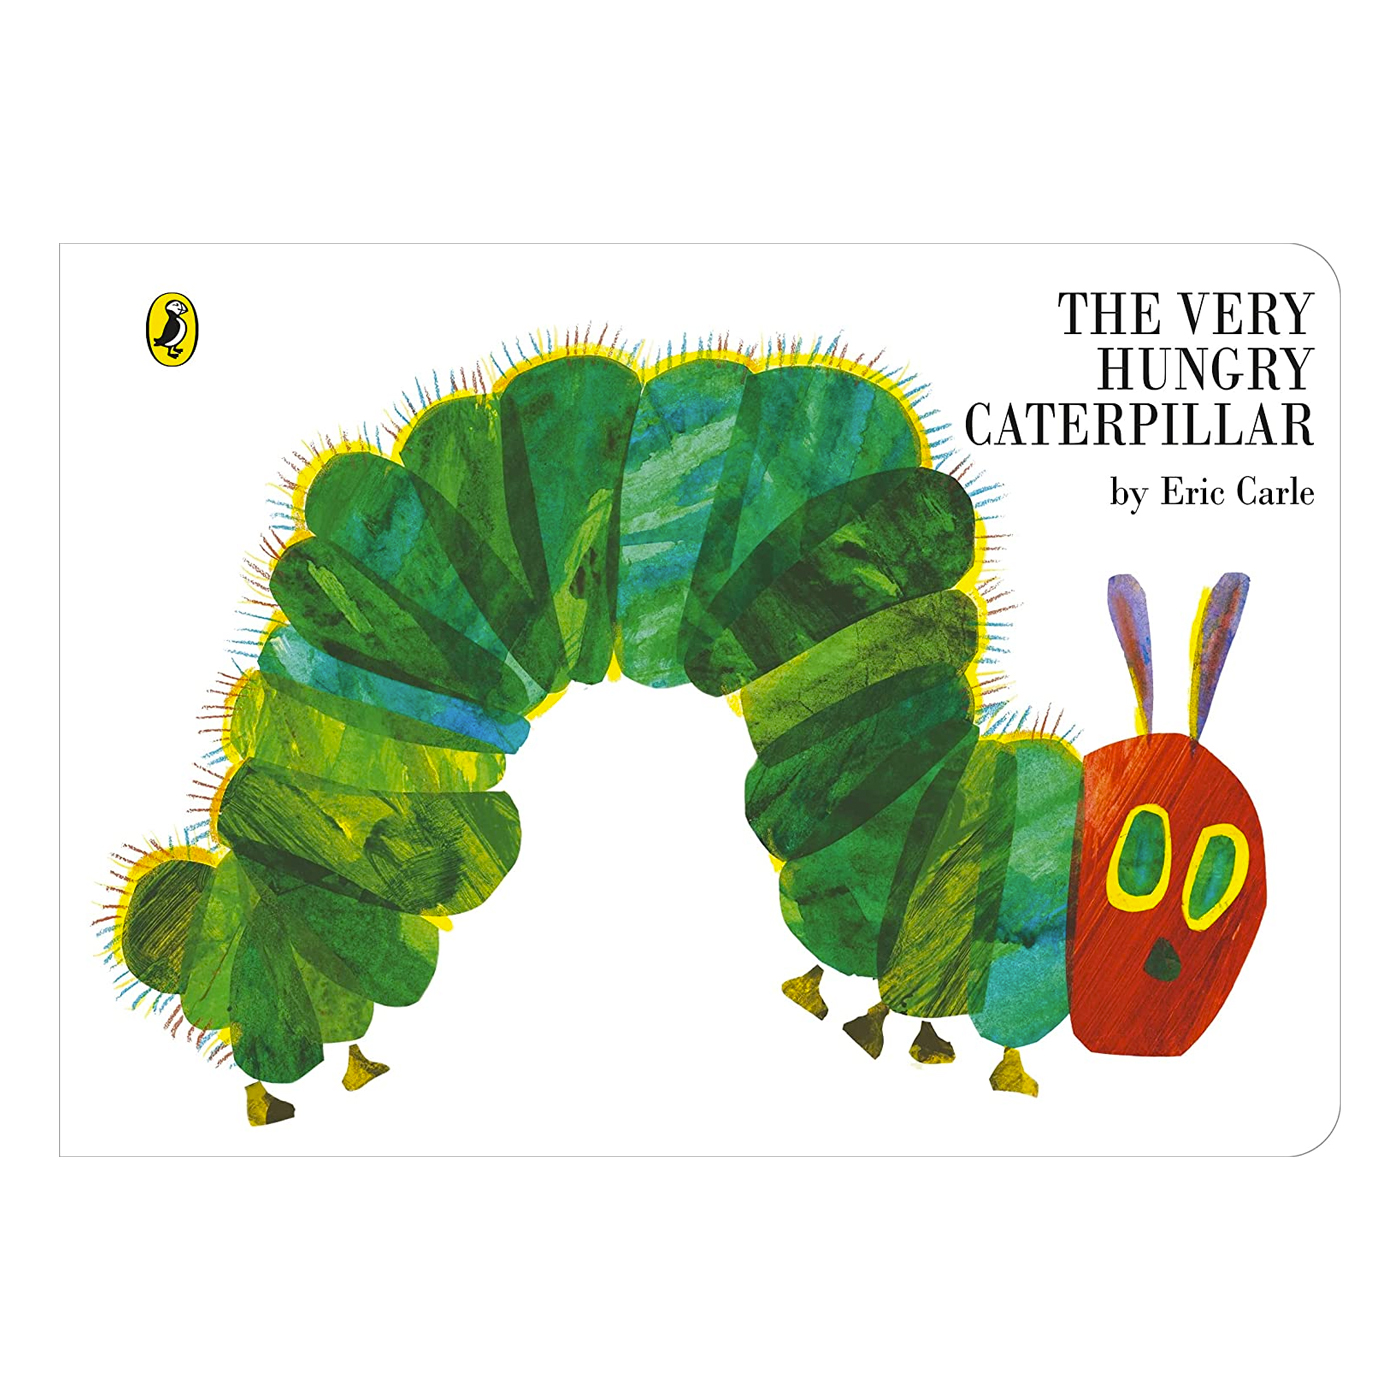  The Very Hungry Caterpillar